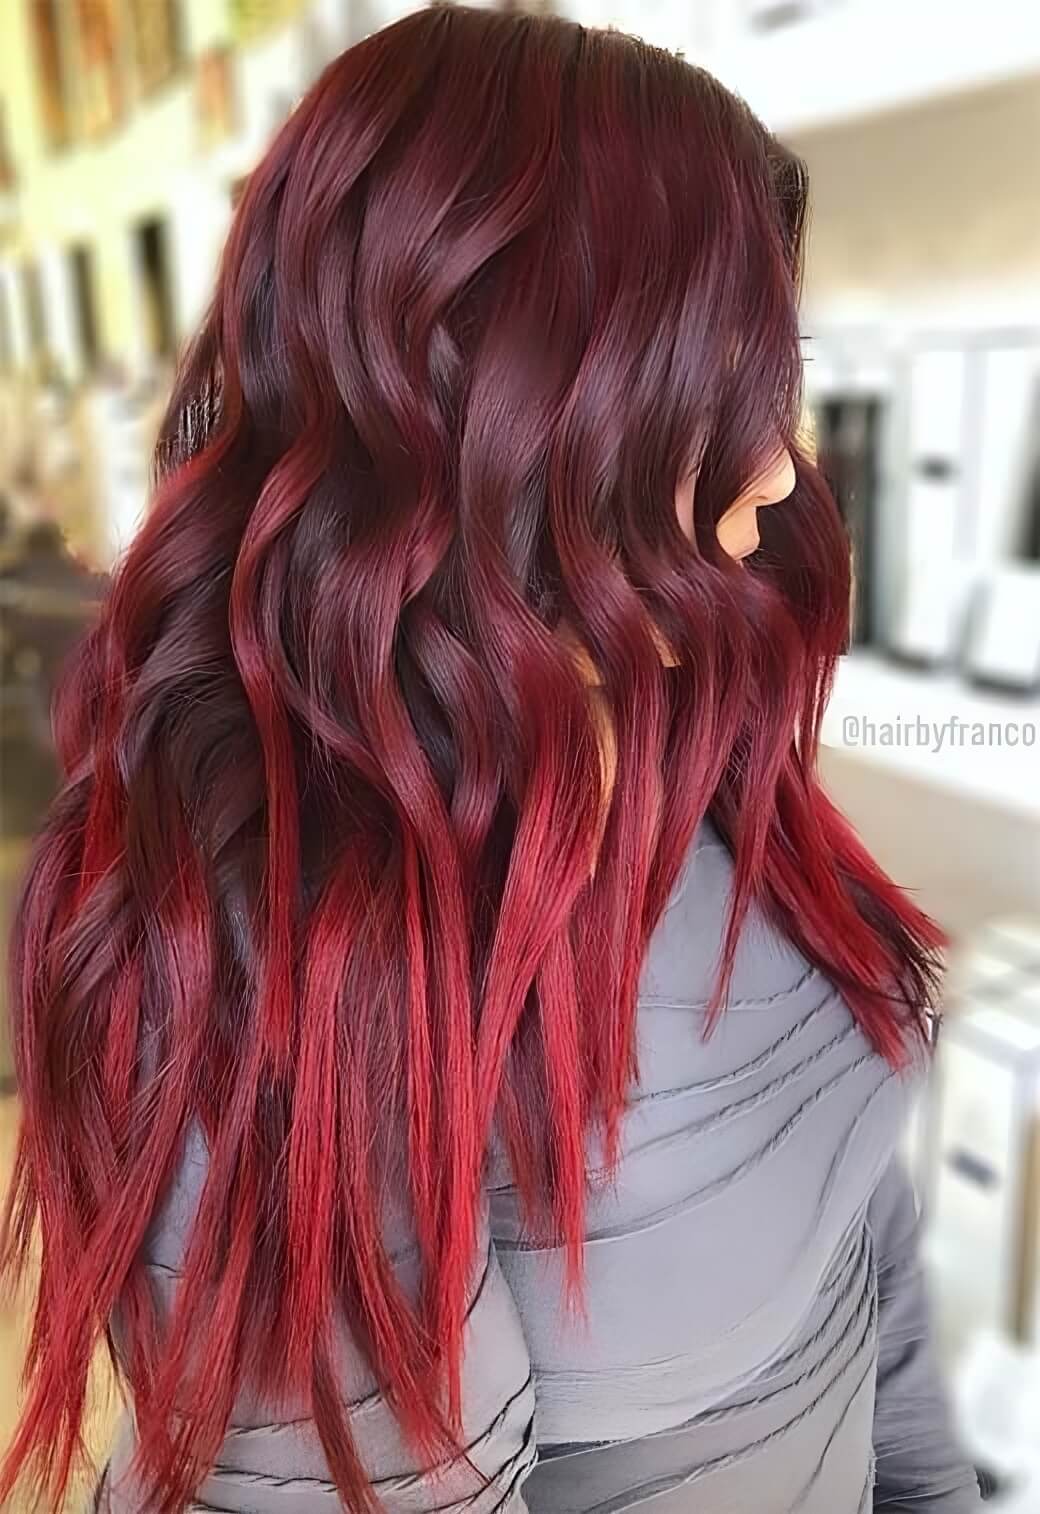 Burgundy Dark Red Hair With Wine-Tipped Ends